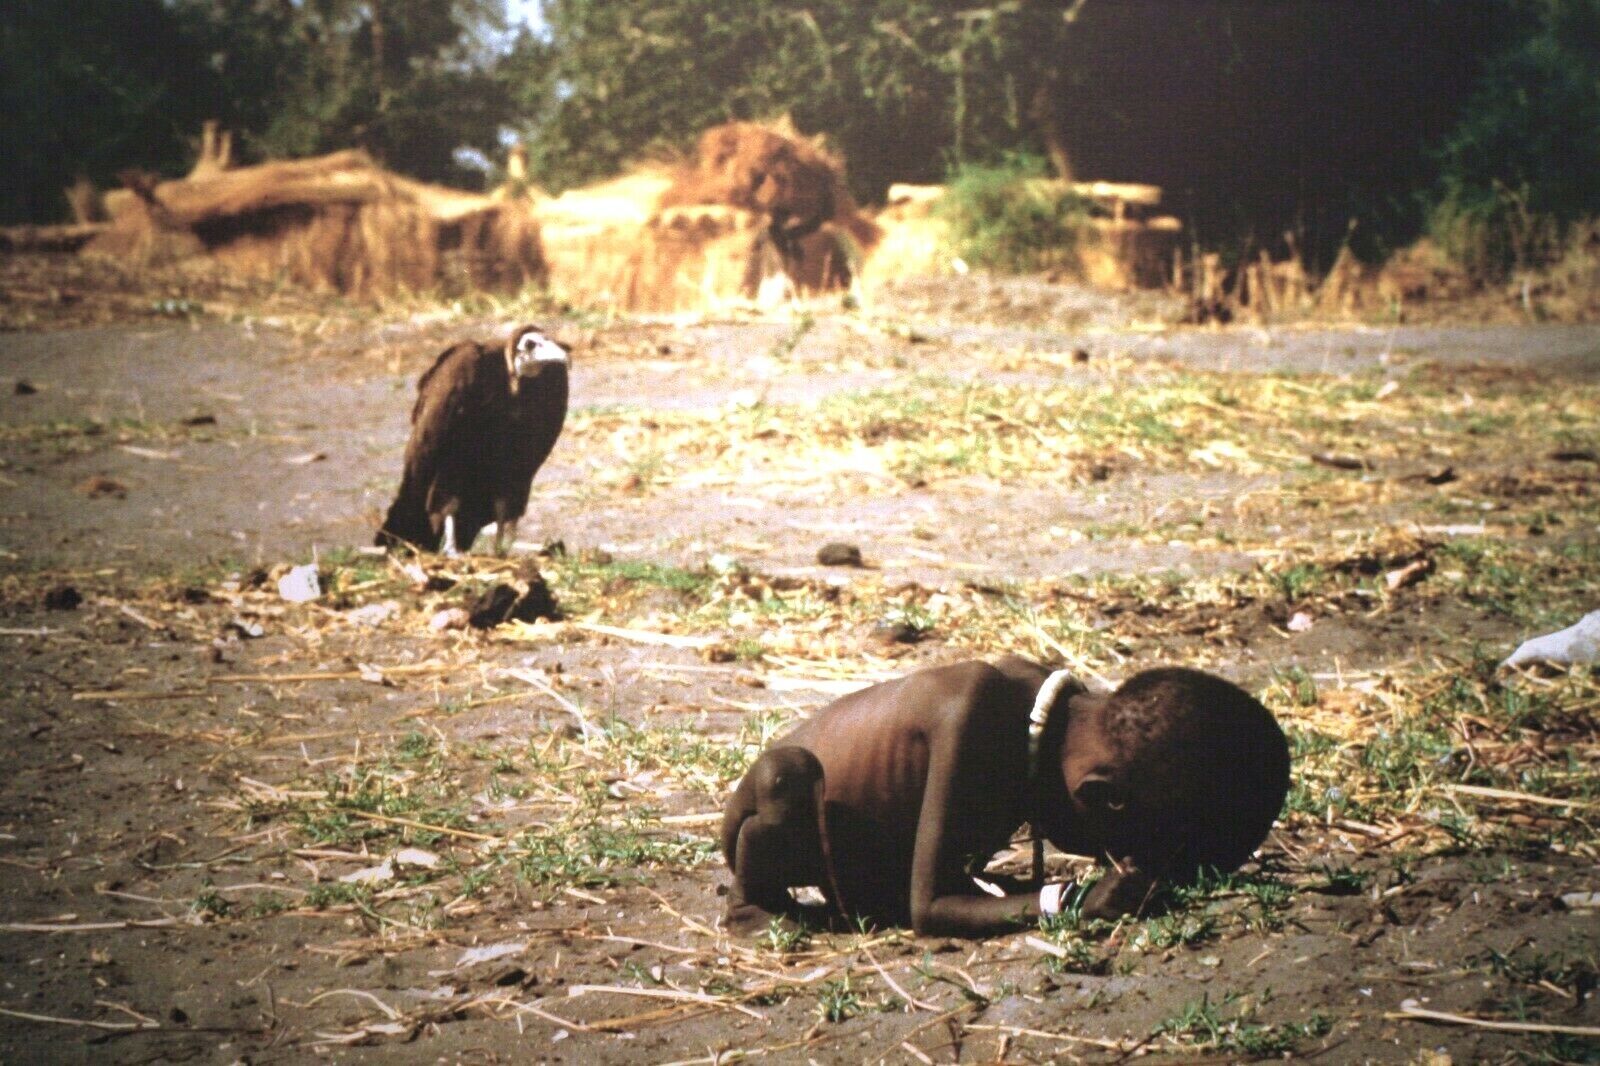 Sudan Famine-Helpless Starving Child-East Africa Famine-Pulitzer Prize Photo